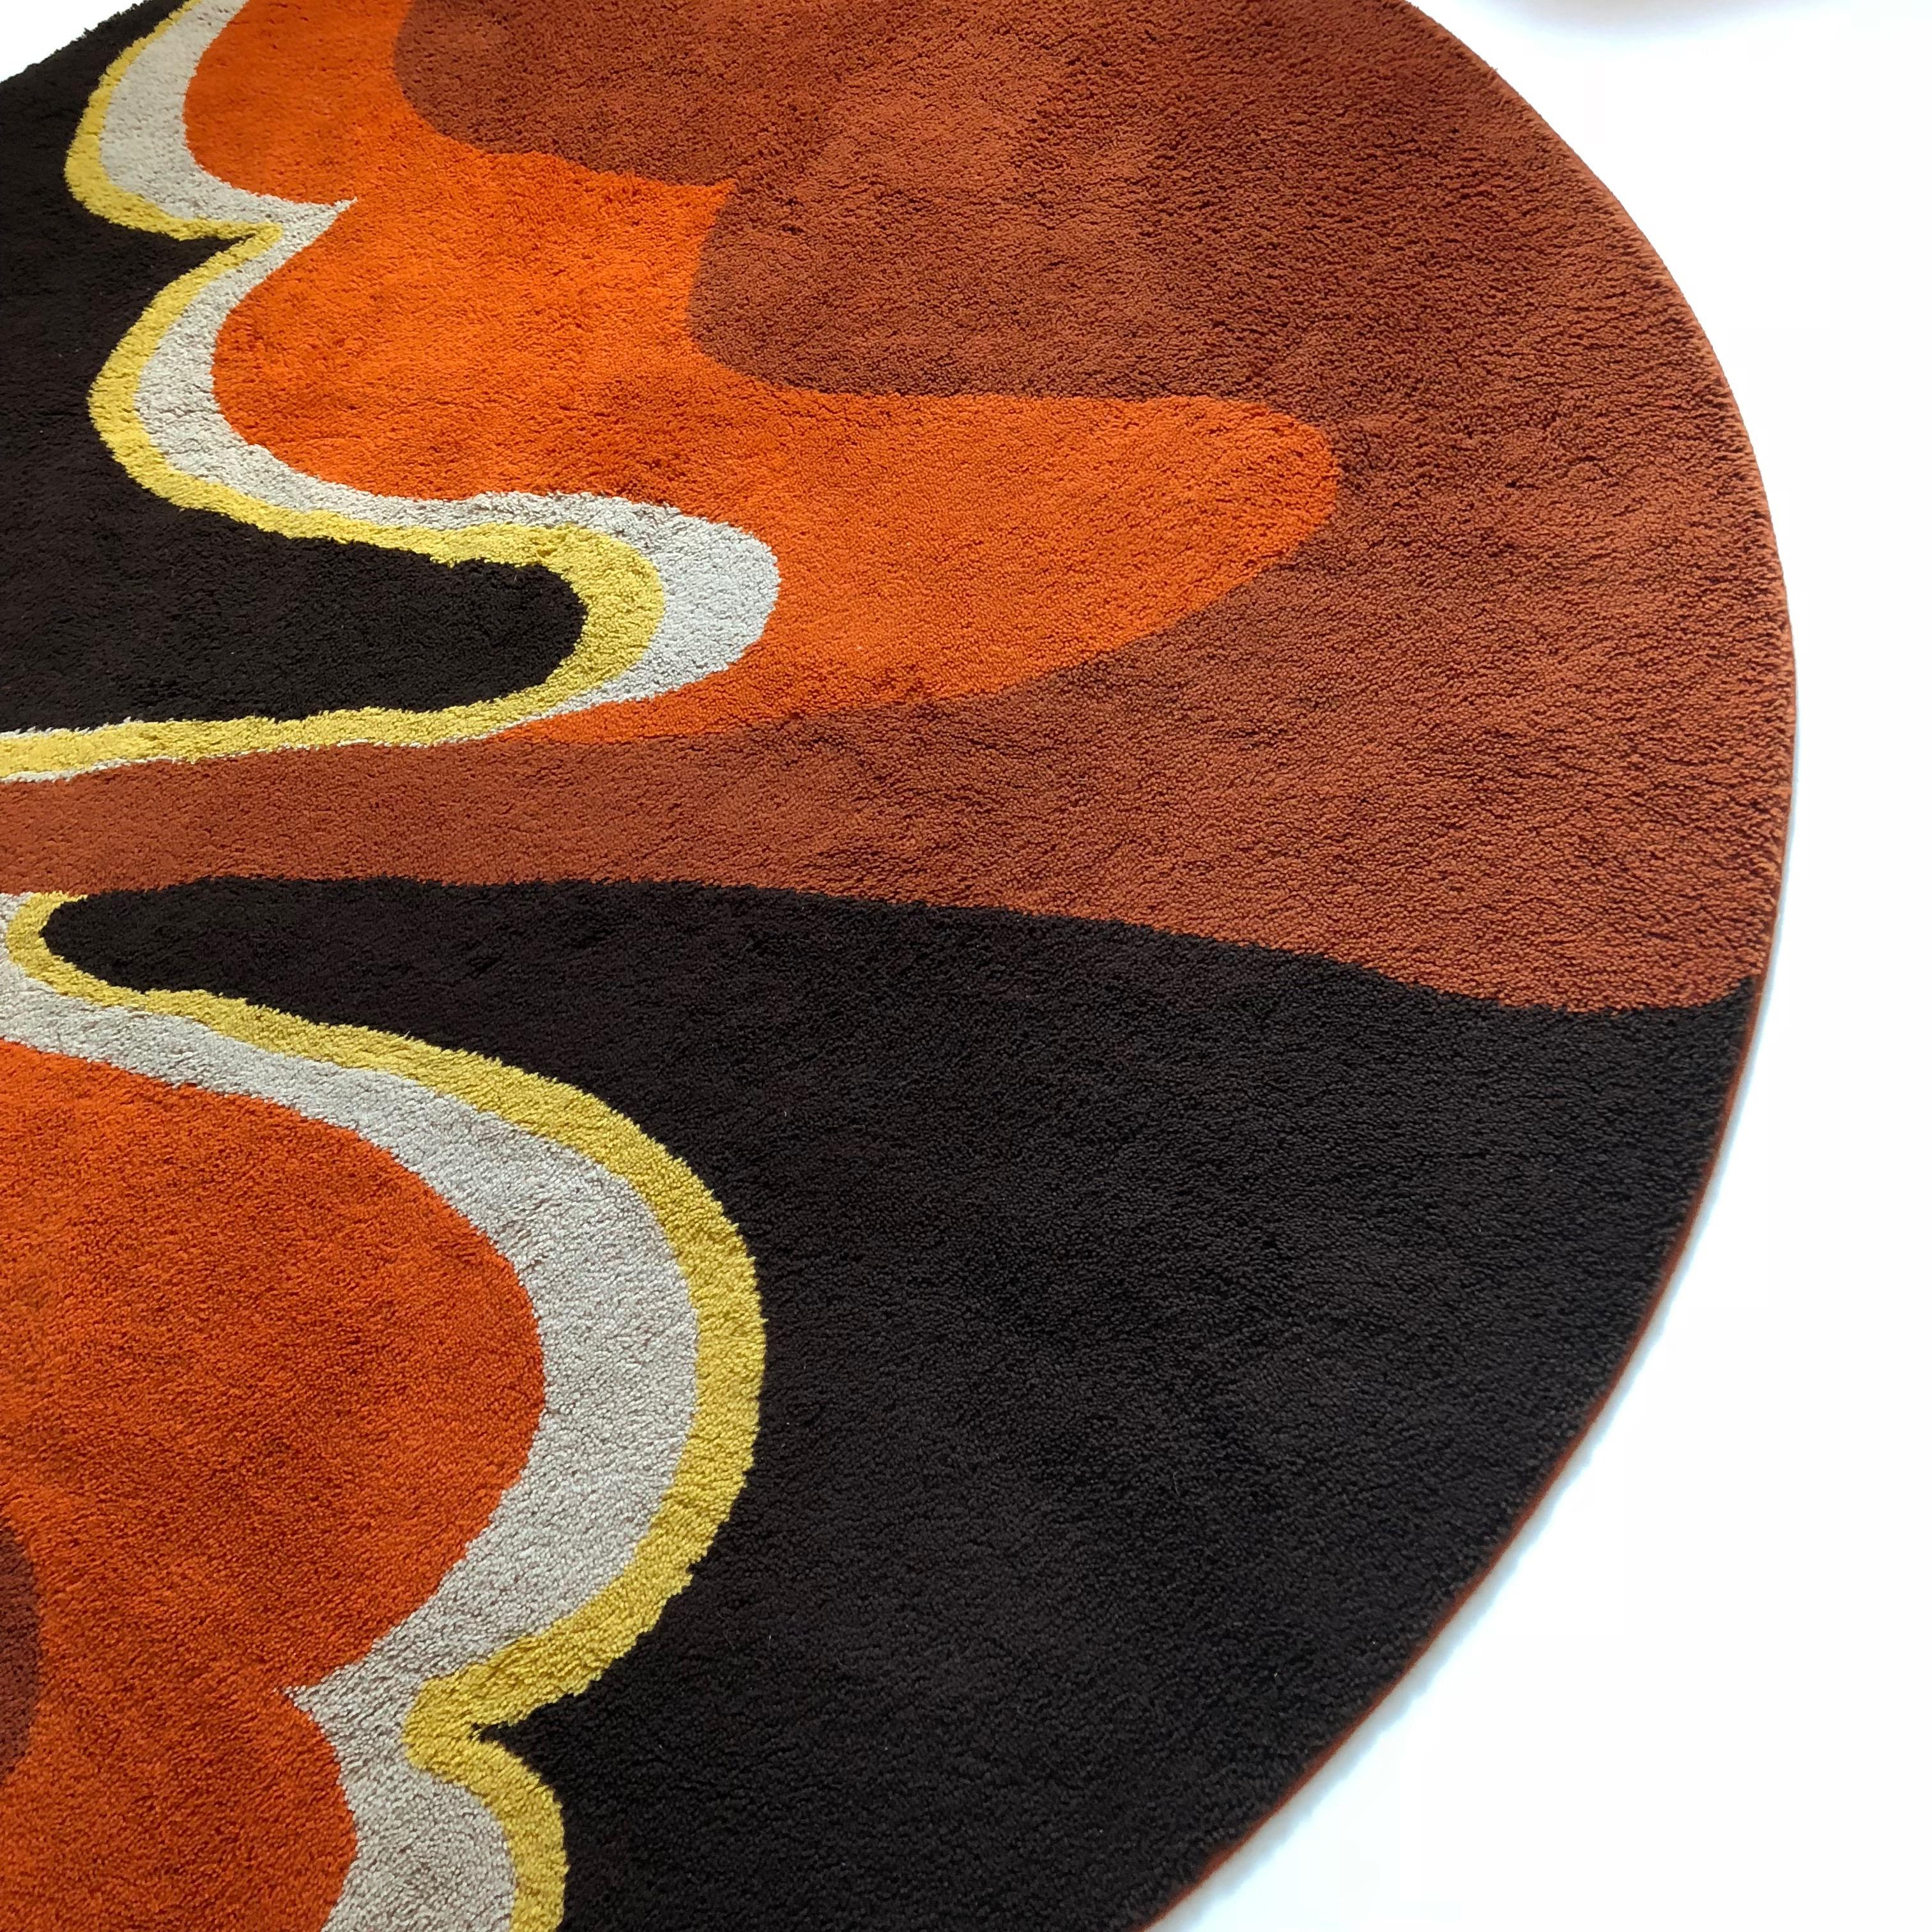 20th Century Large Psychedelic Panton High Pile Rug Carpet by Cromwell Tefzet, Germany